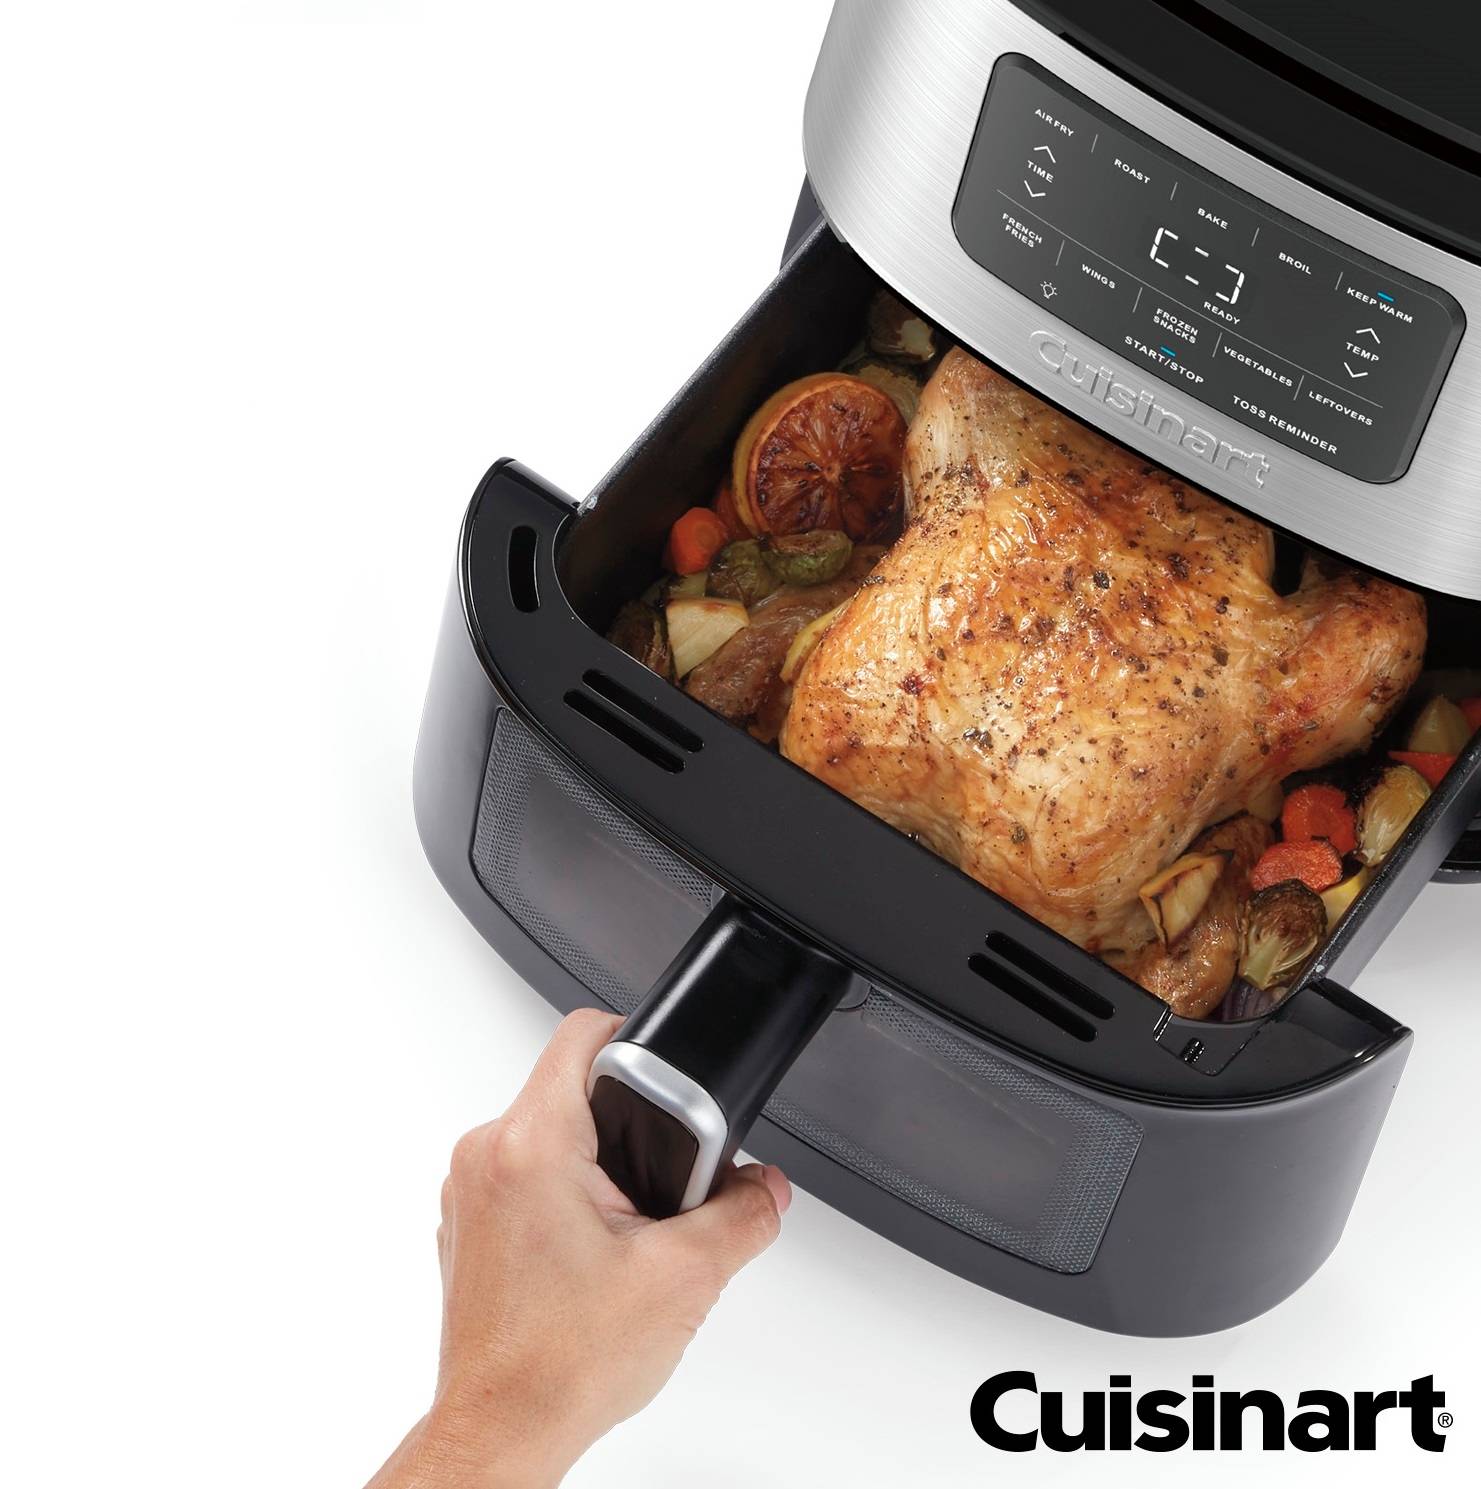 Revolutionize Your Cooking with the Cuisinart Black Basket Airfryer!